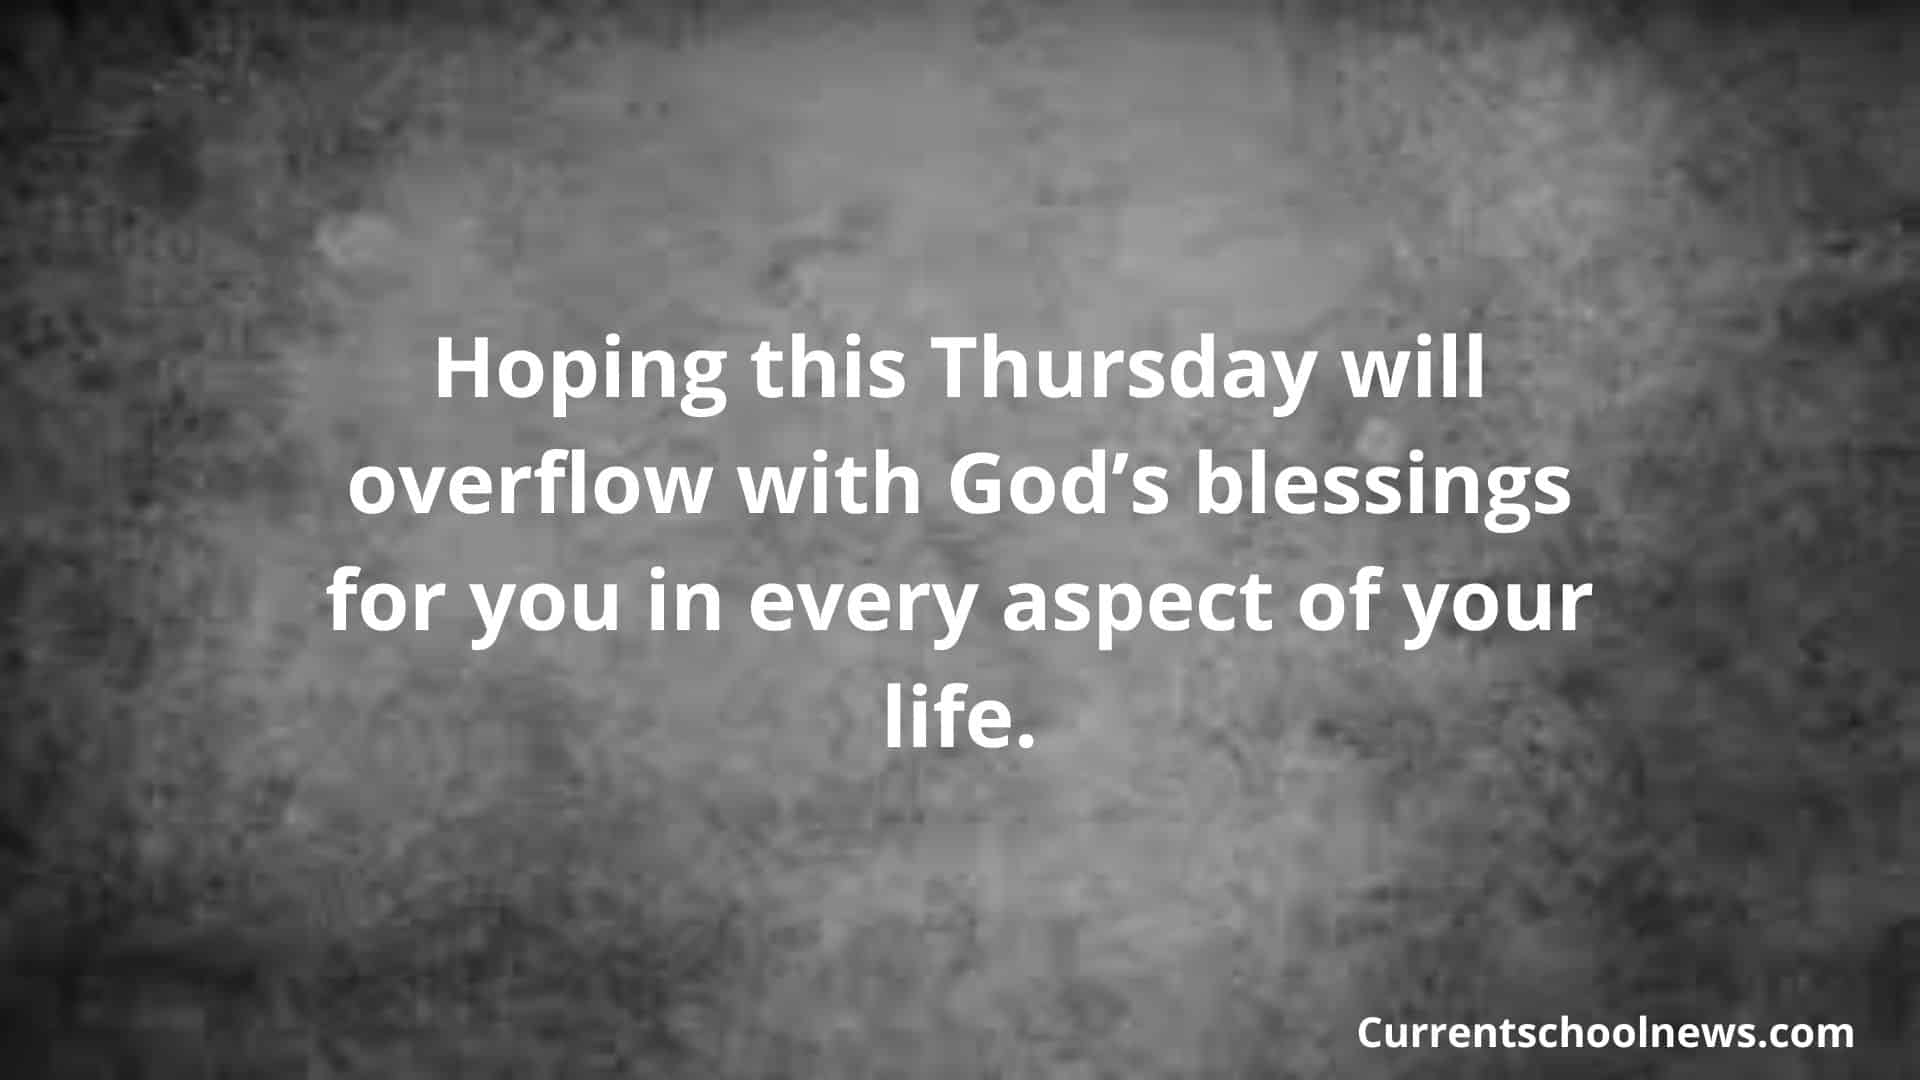 Good Morning Thursday Blessings Images and Quotes